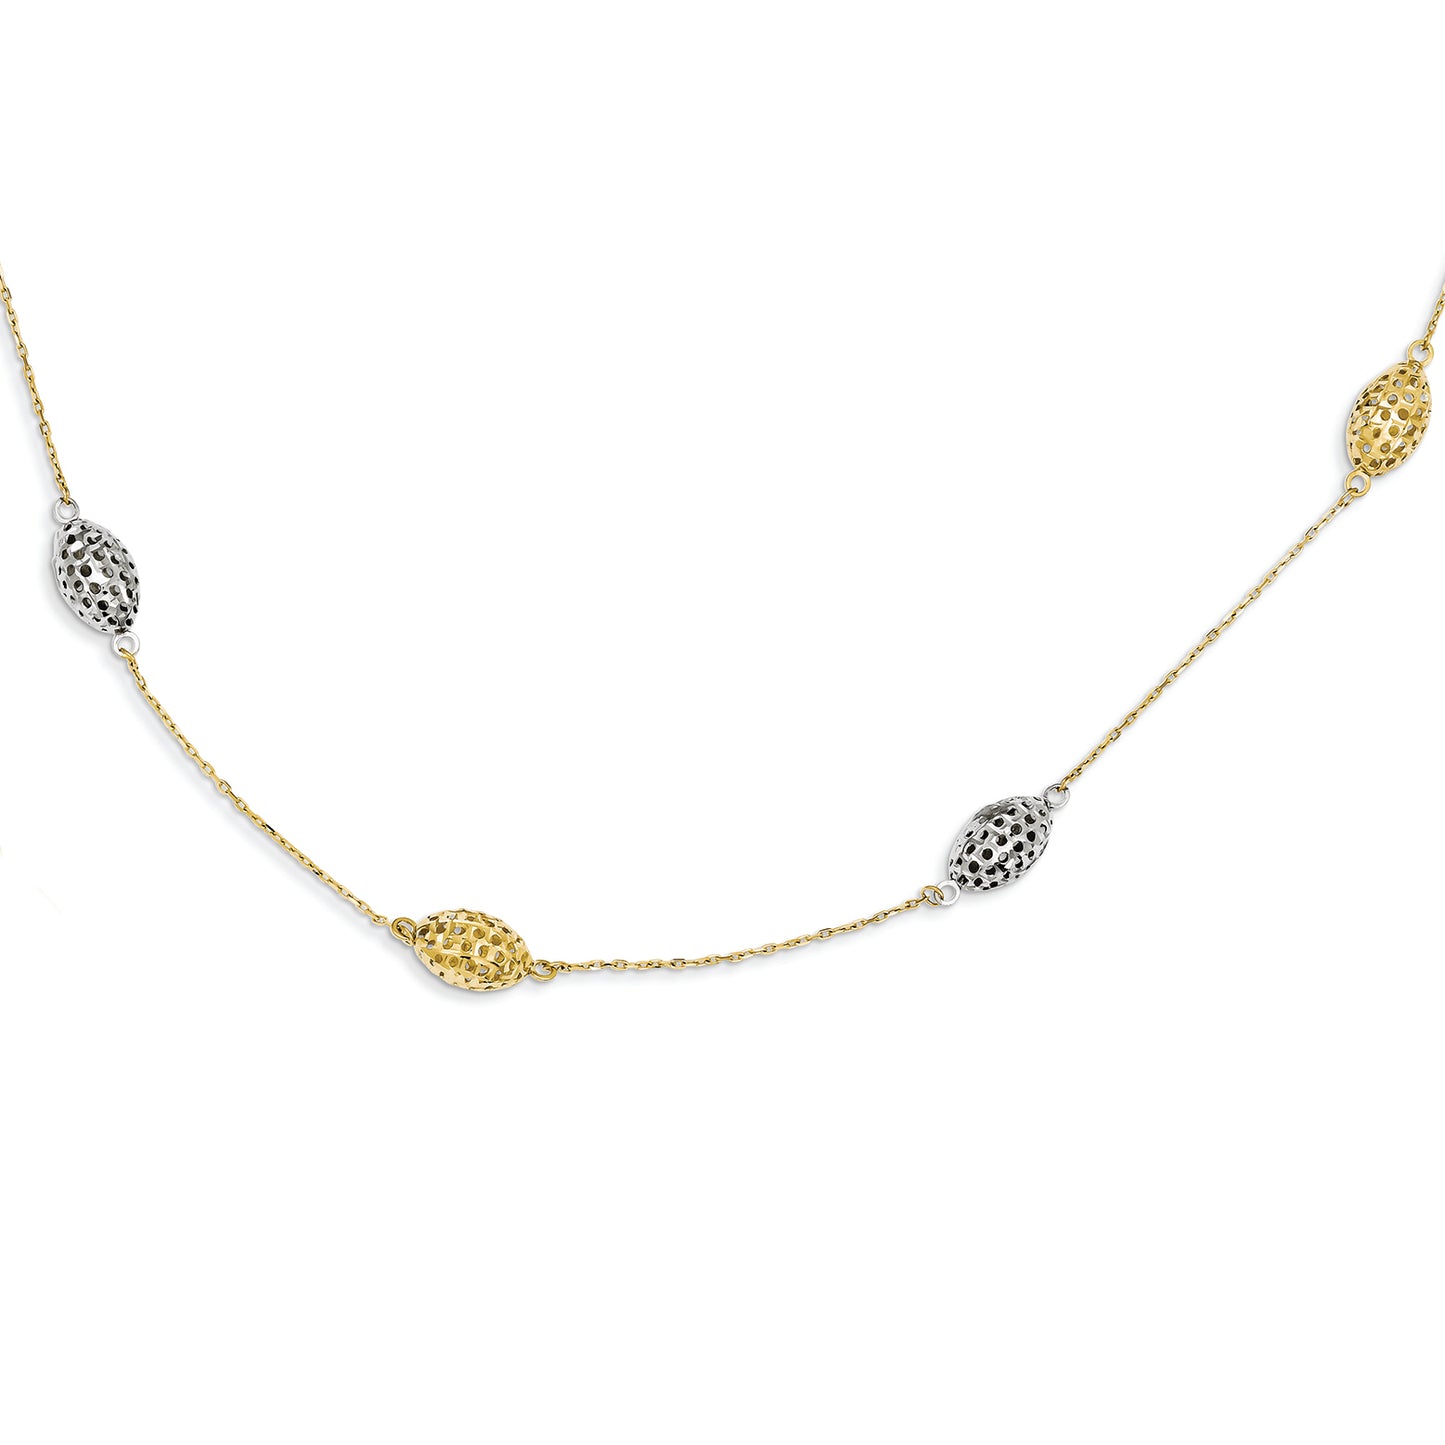 14K Gold Two-tone Diamond Cut Bead Necklace 17 Inches